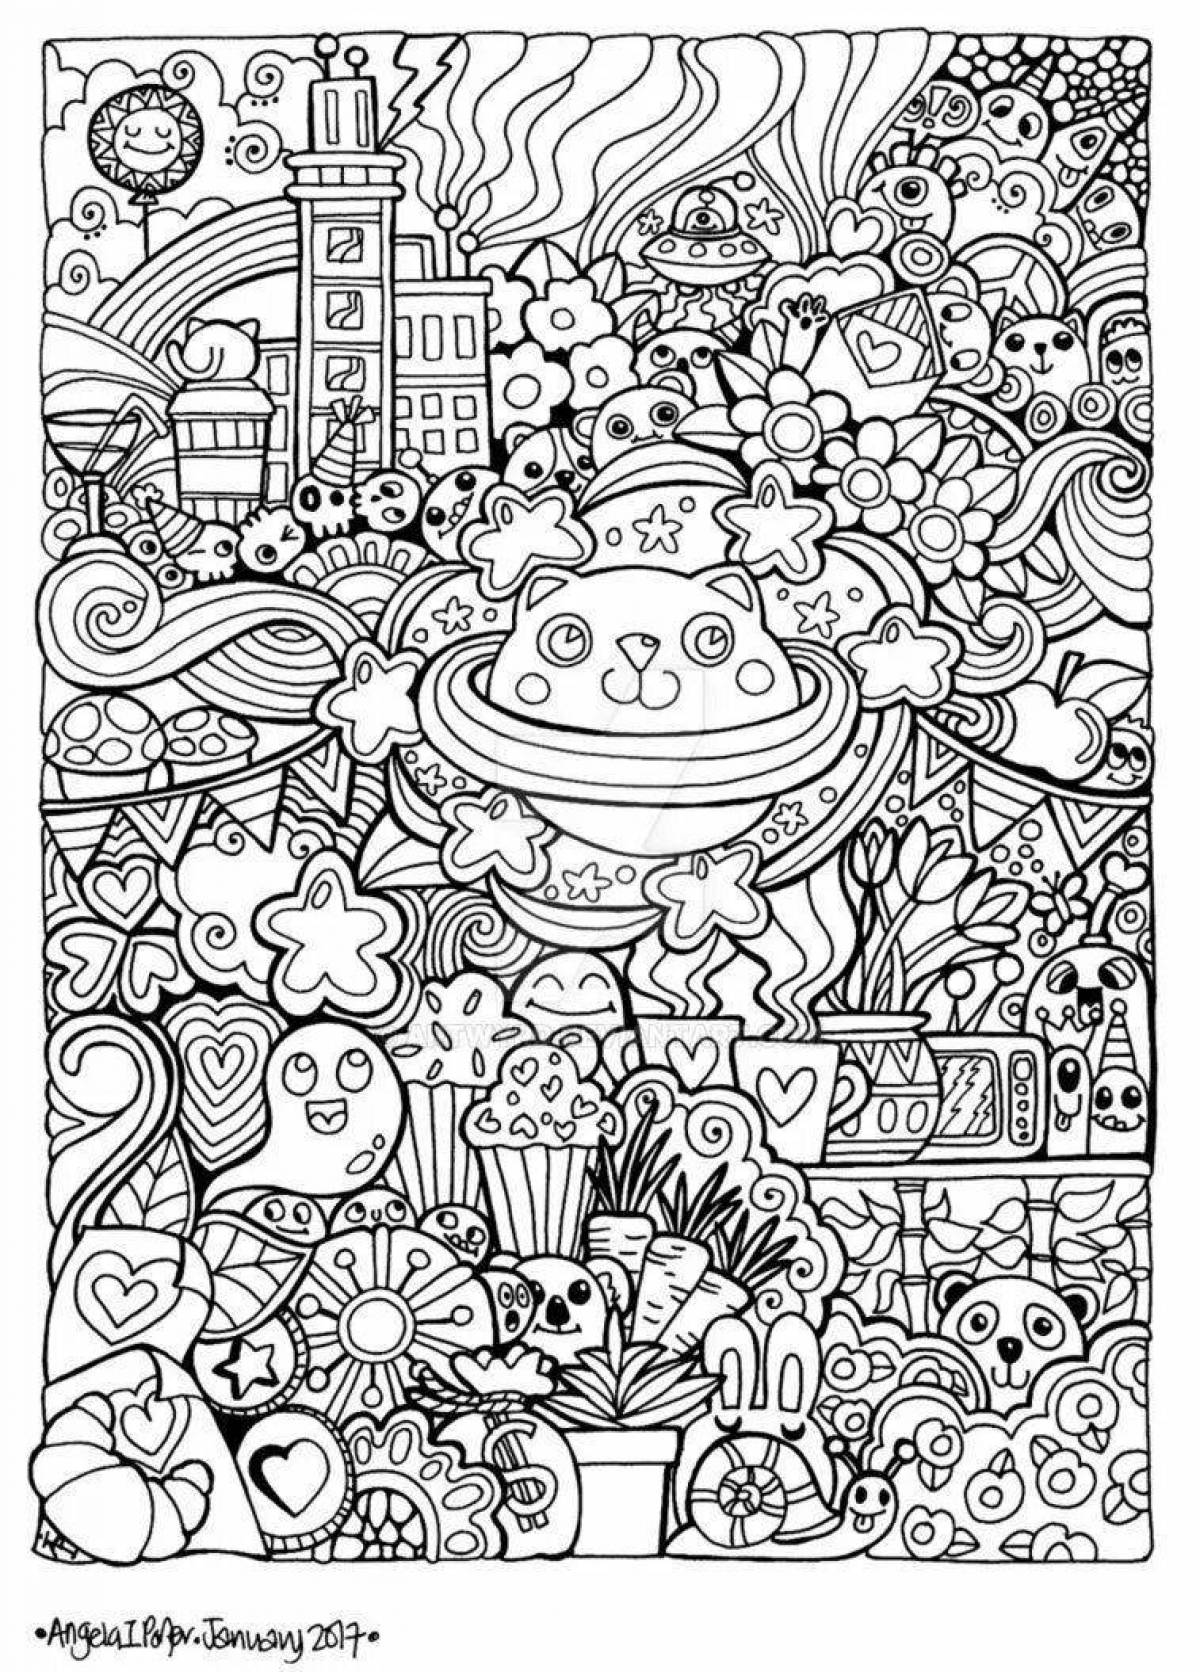 Incredible coloring book with lots of details